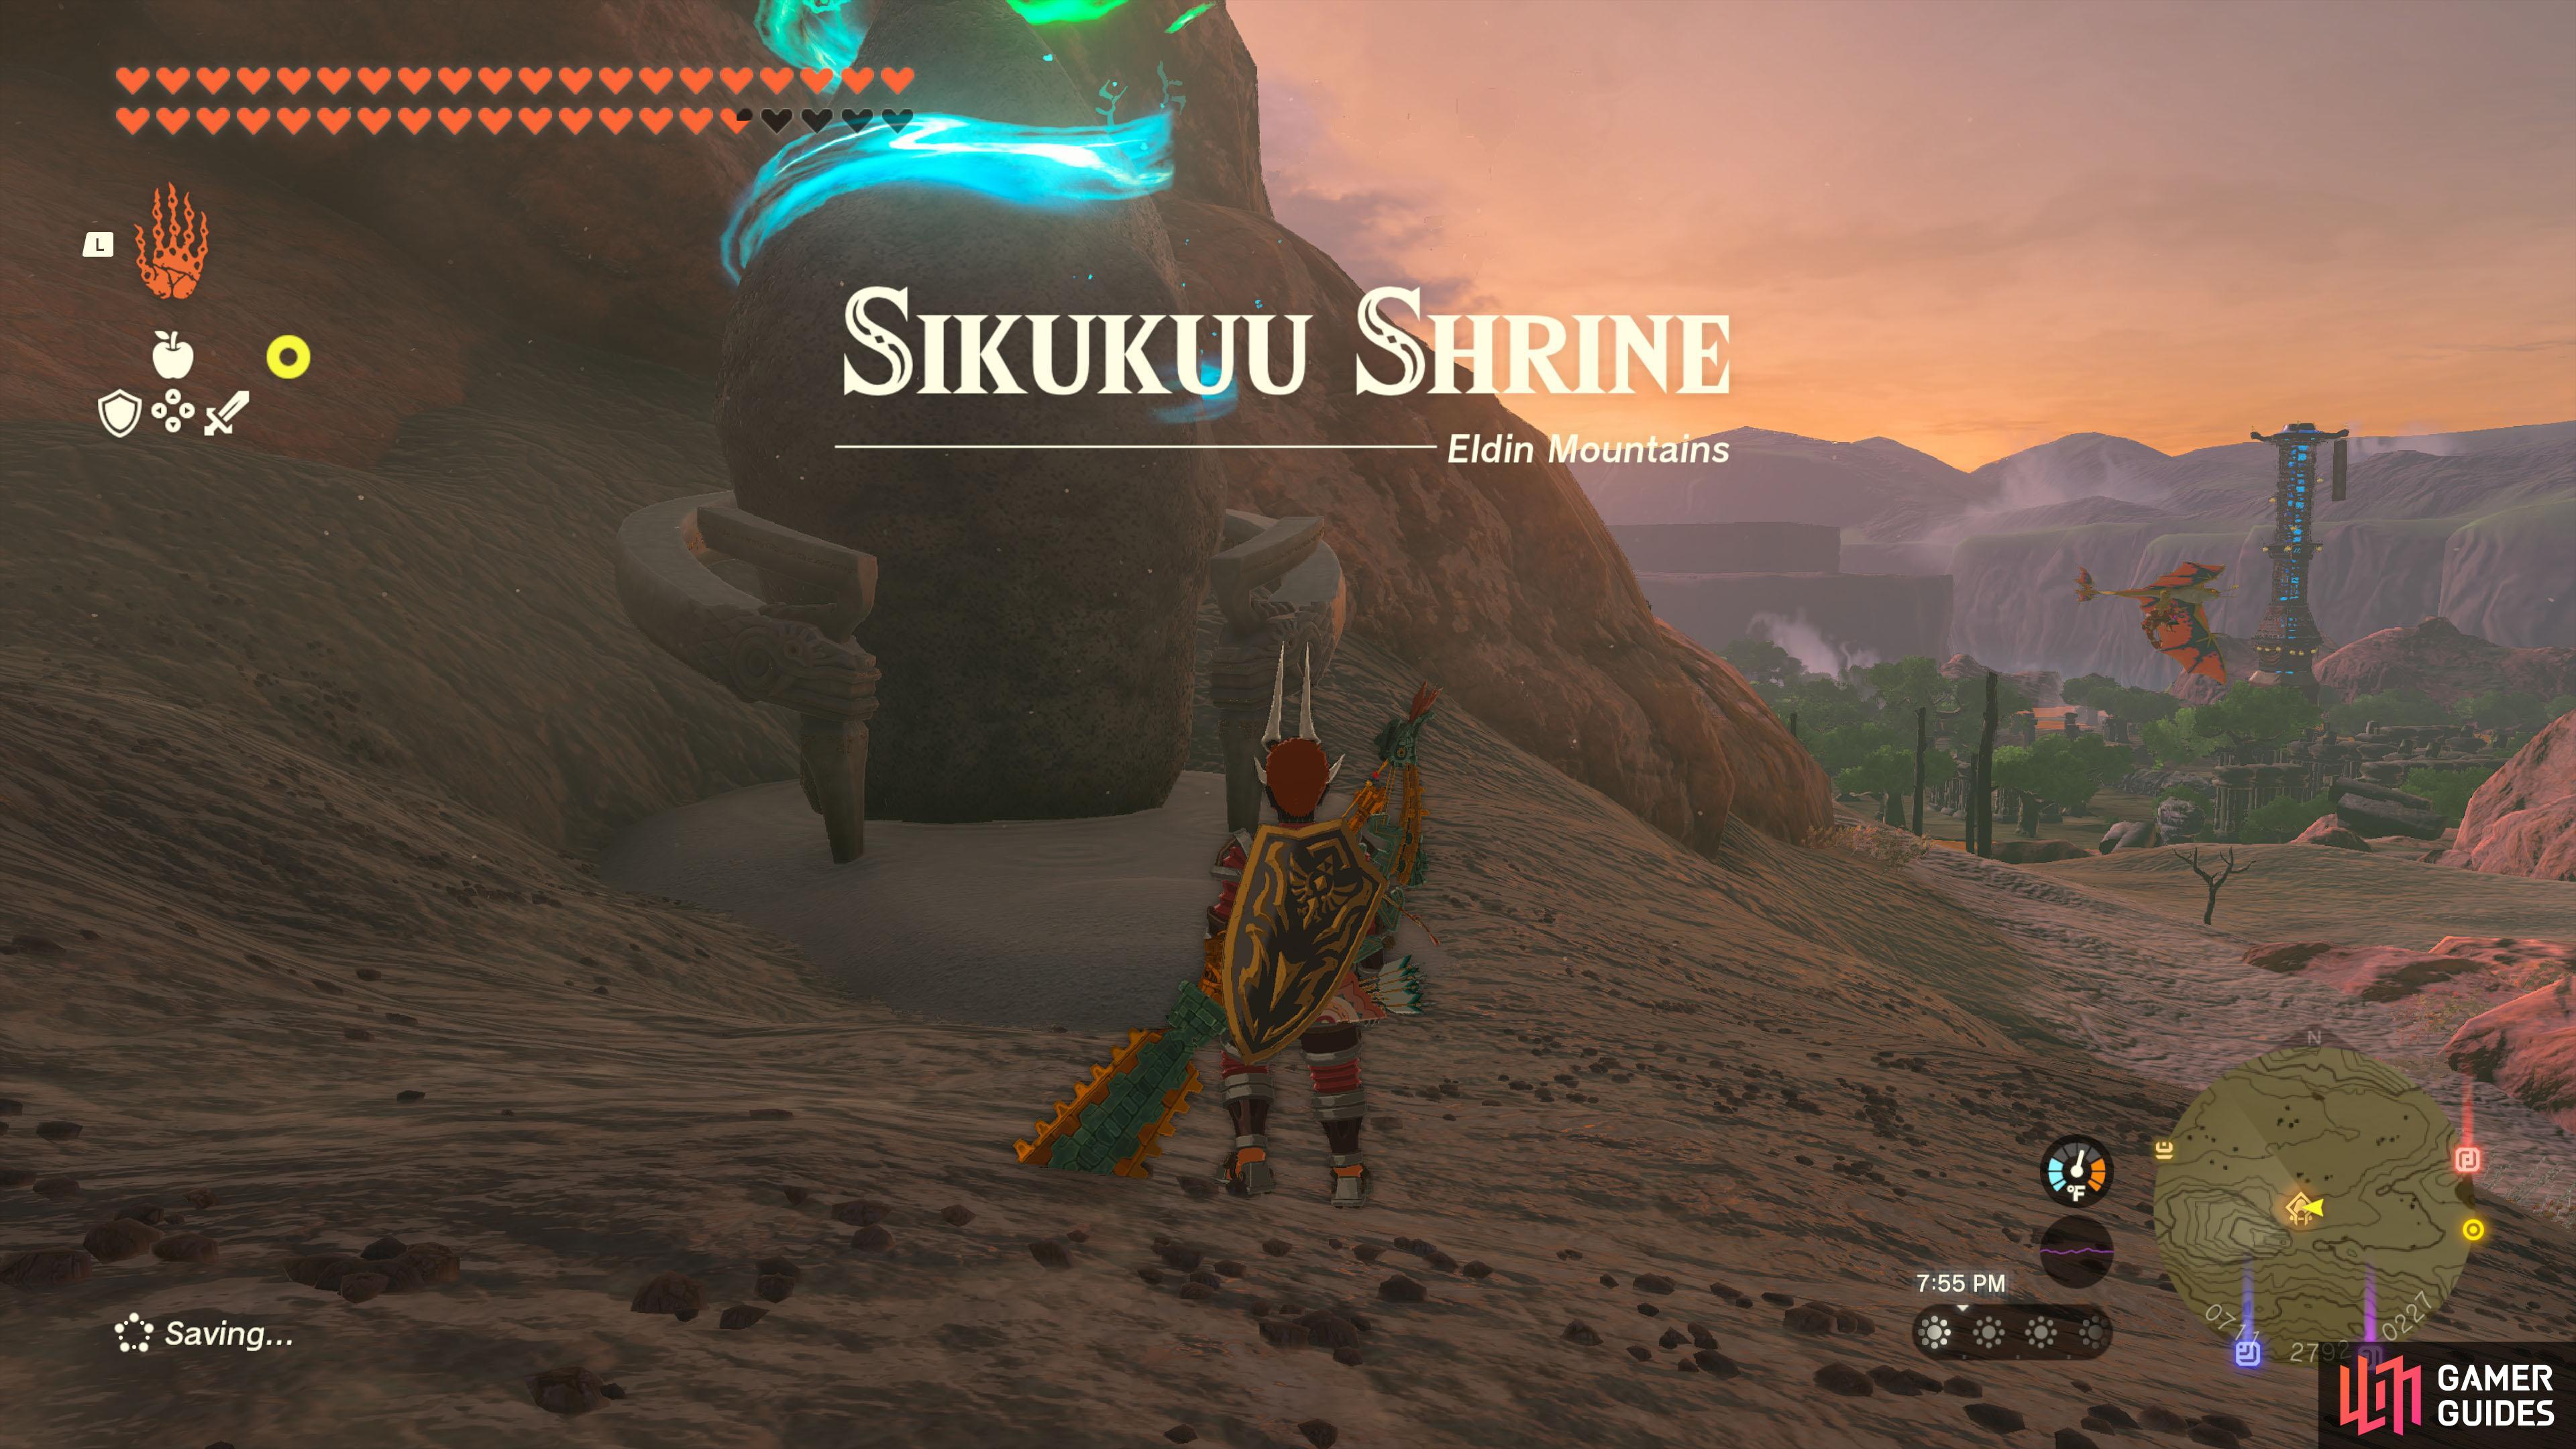 You can find the Sikukuu Shrine in the Eldin Mountains.